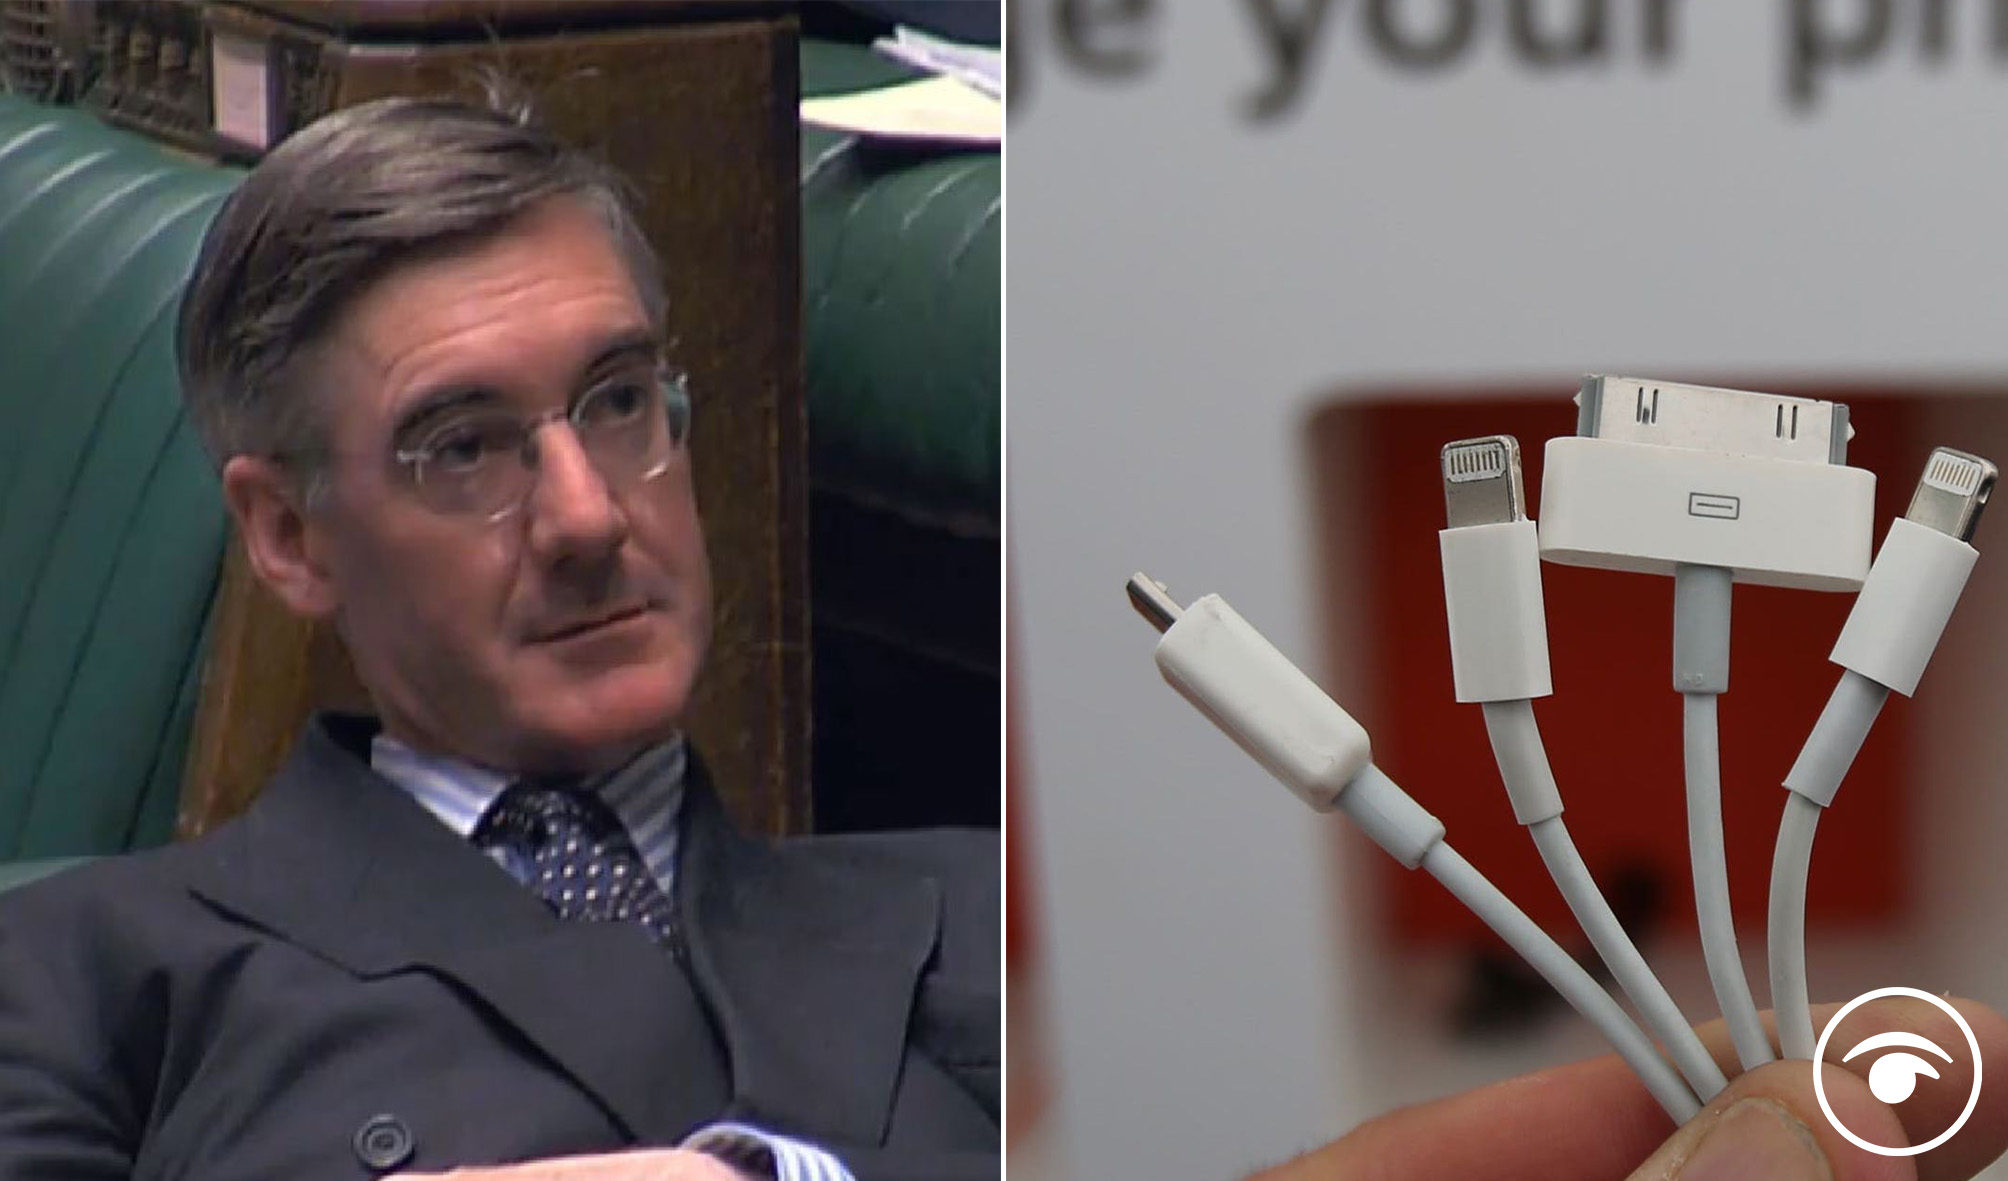 What a plug! Rees-Mogg mocked for saying phone chargers are a ‘Brexit benefit’